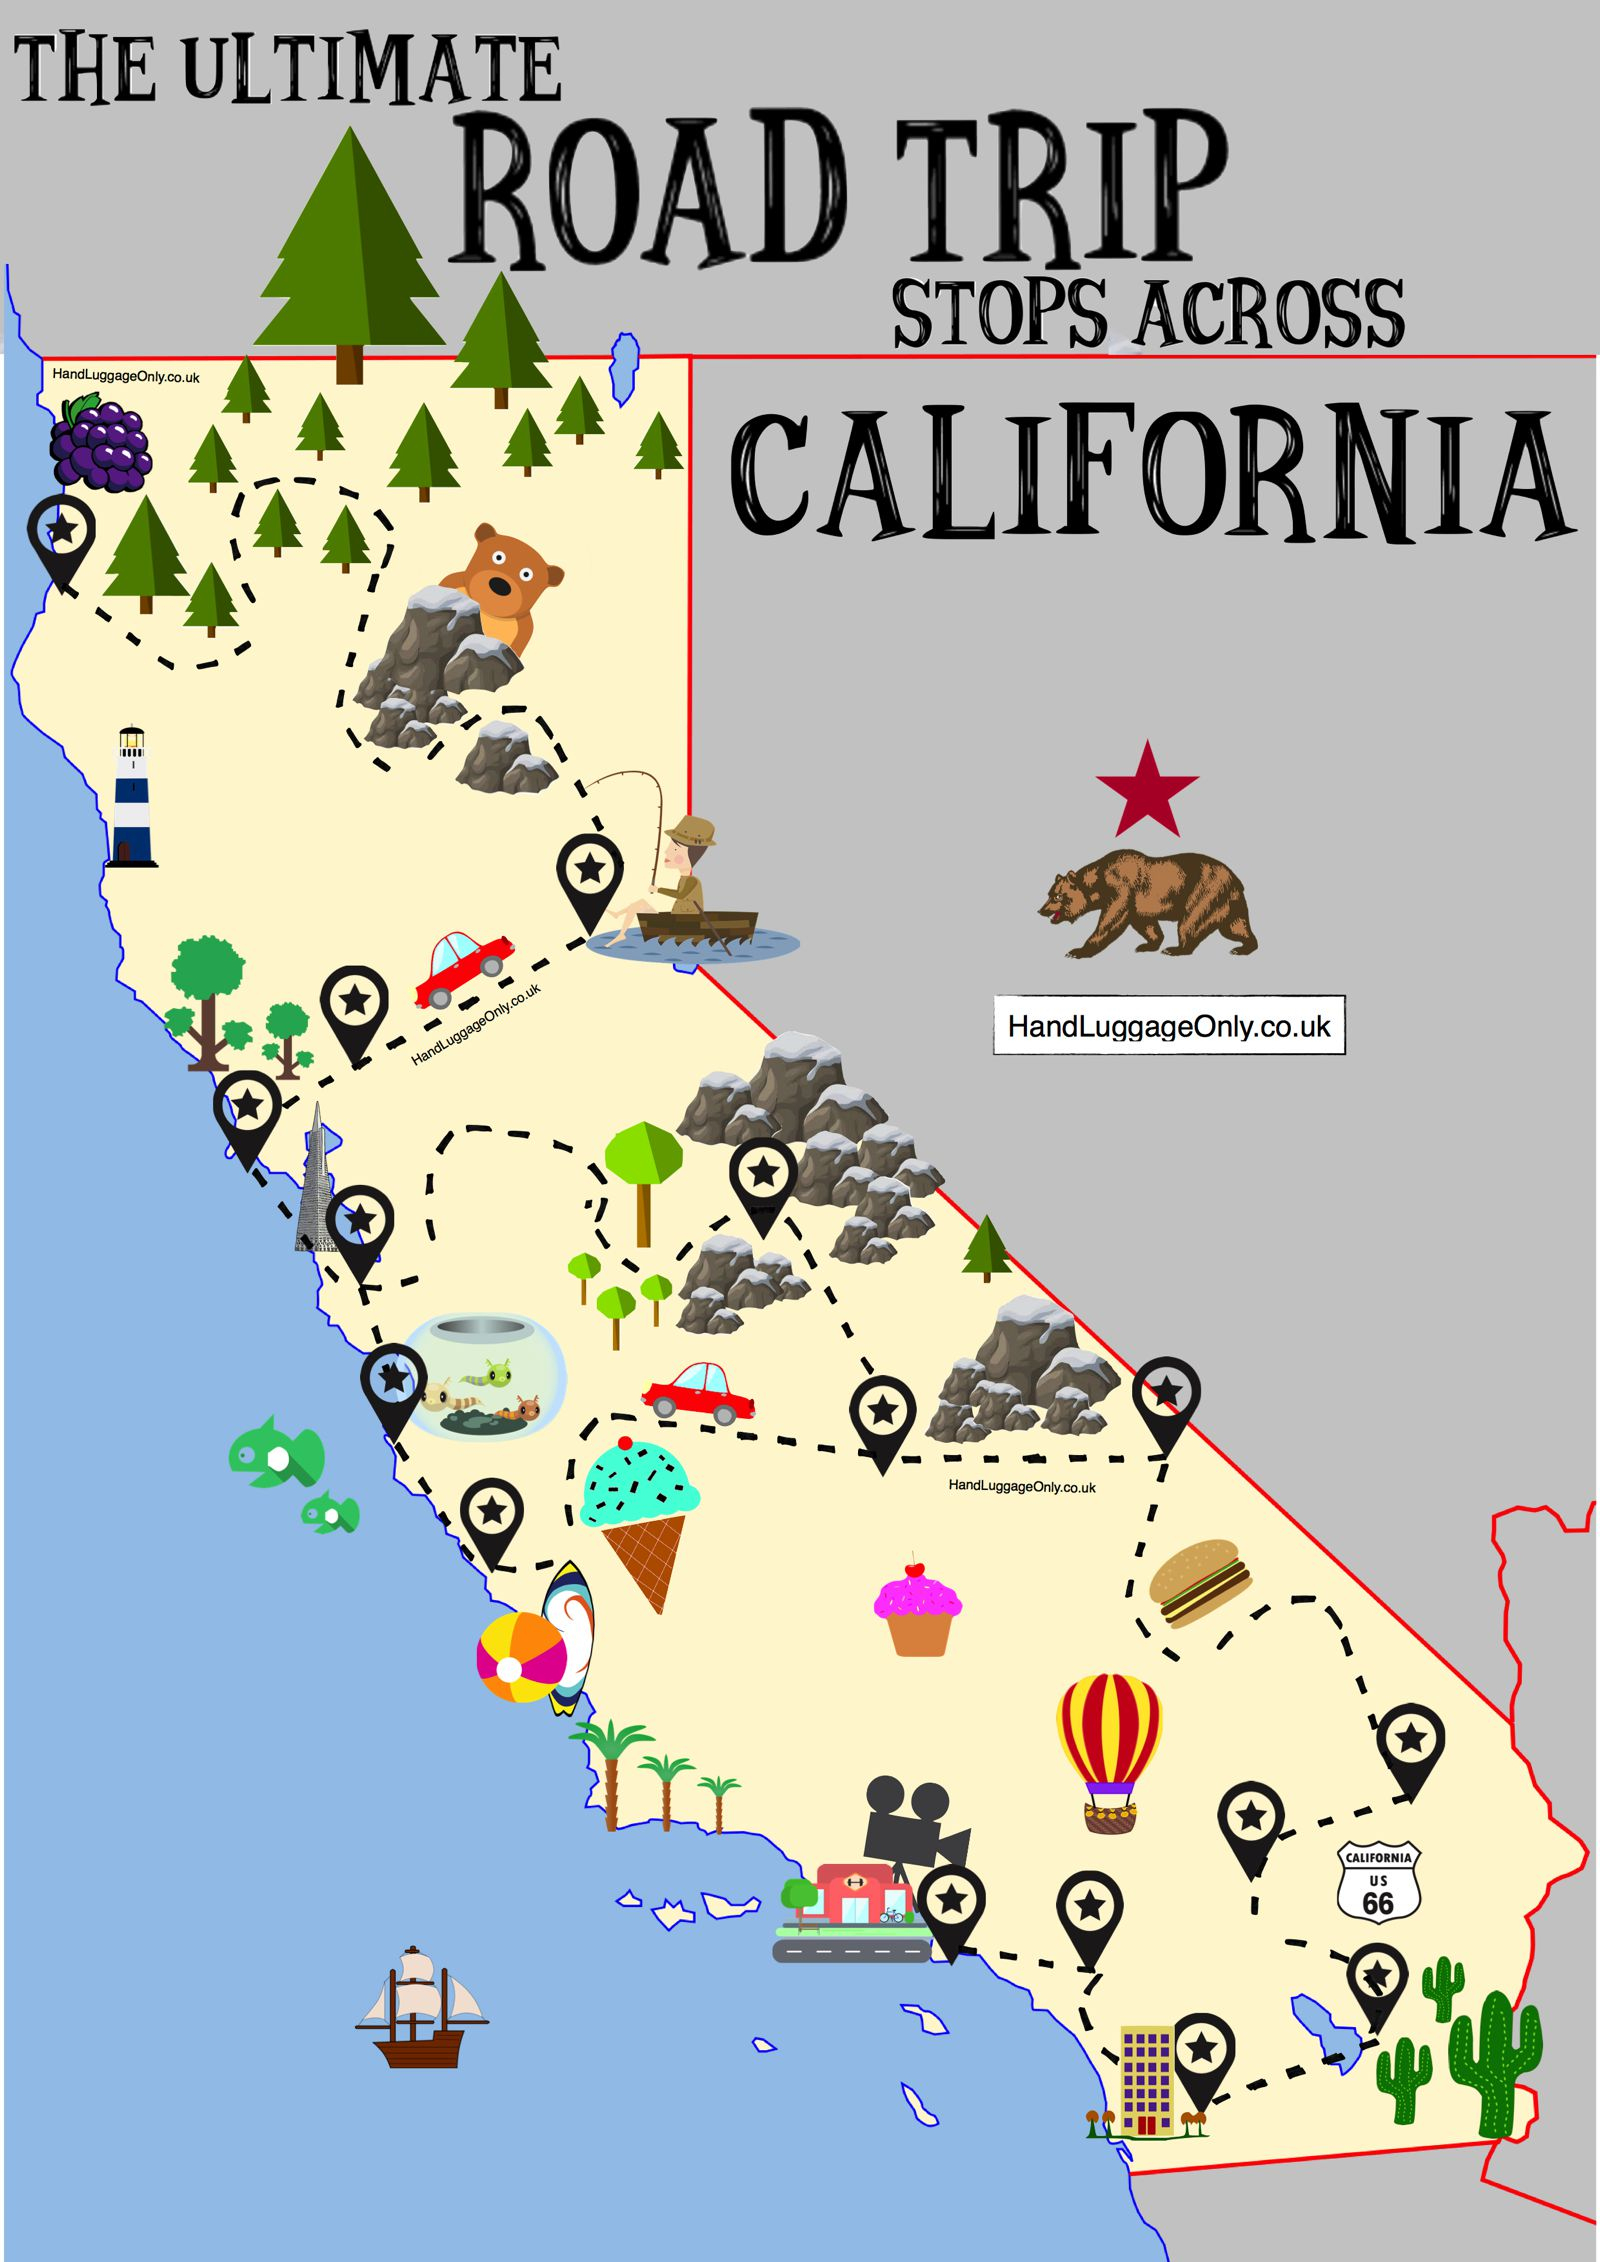 The Ultimate Road Trip Map Of Places To Visit In California - Hand - Route 1 California Map